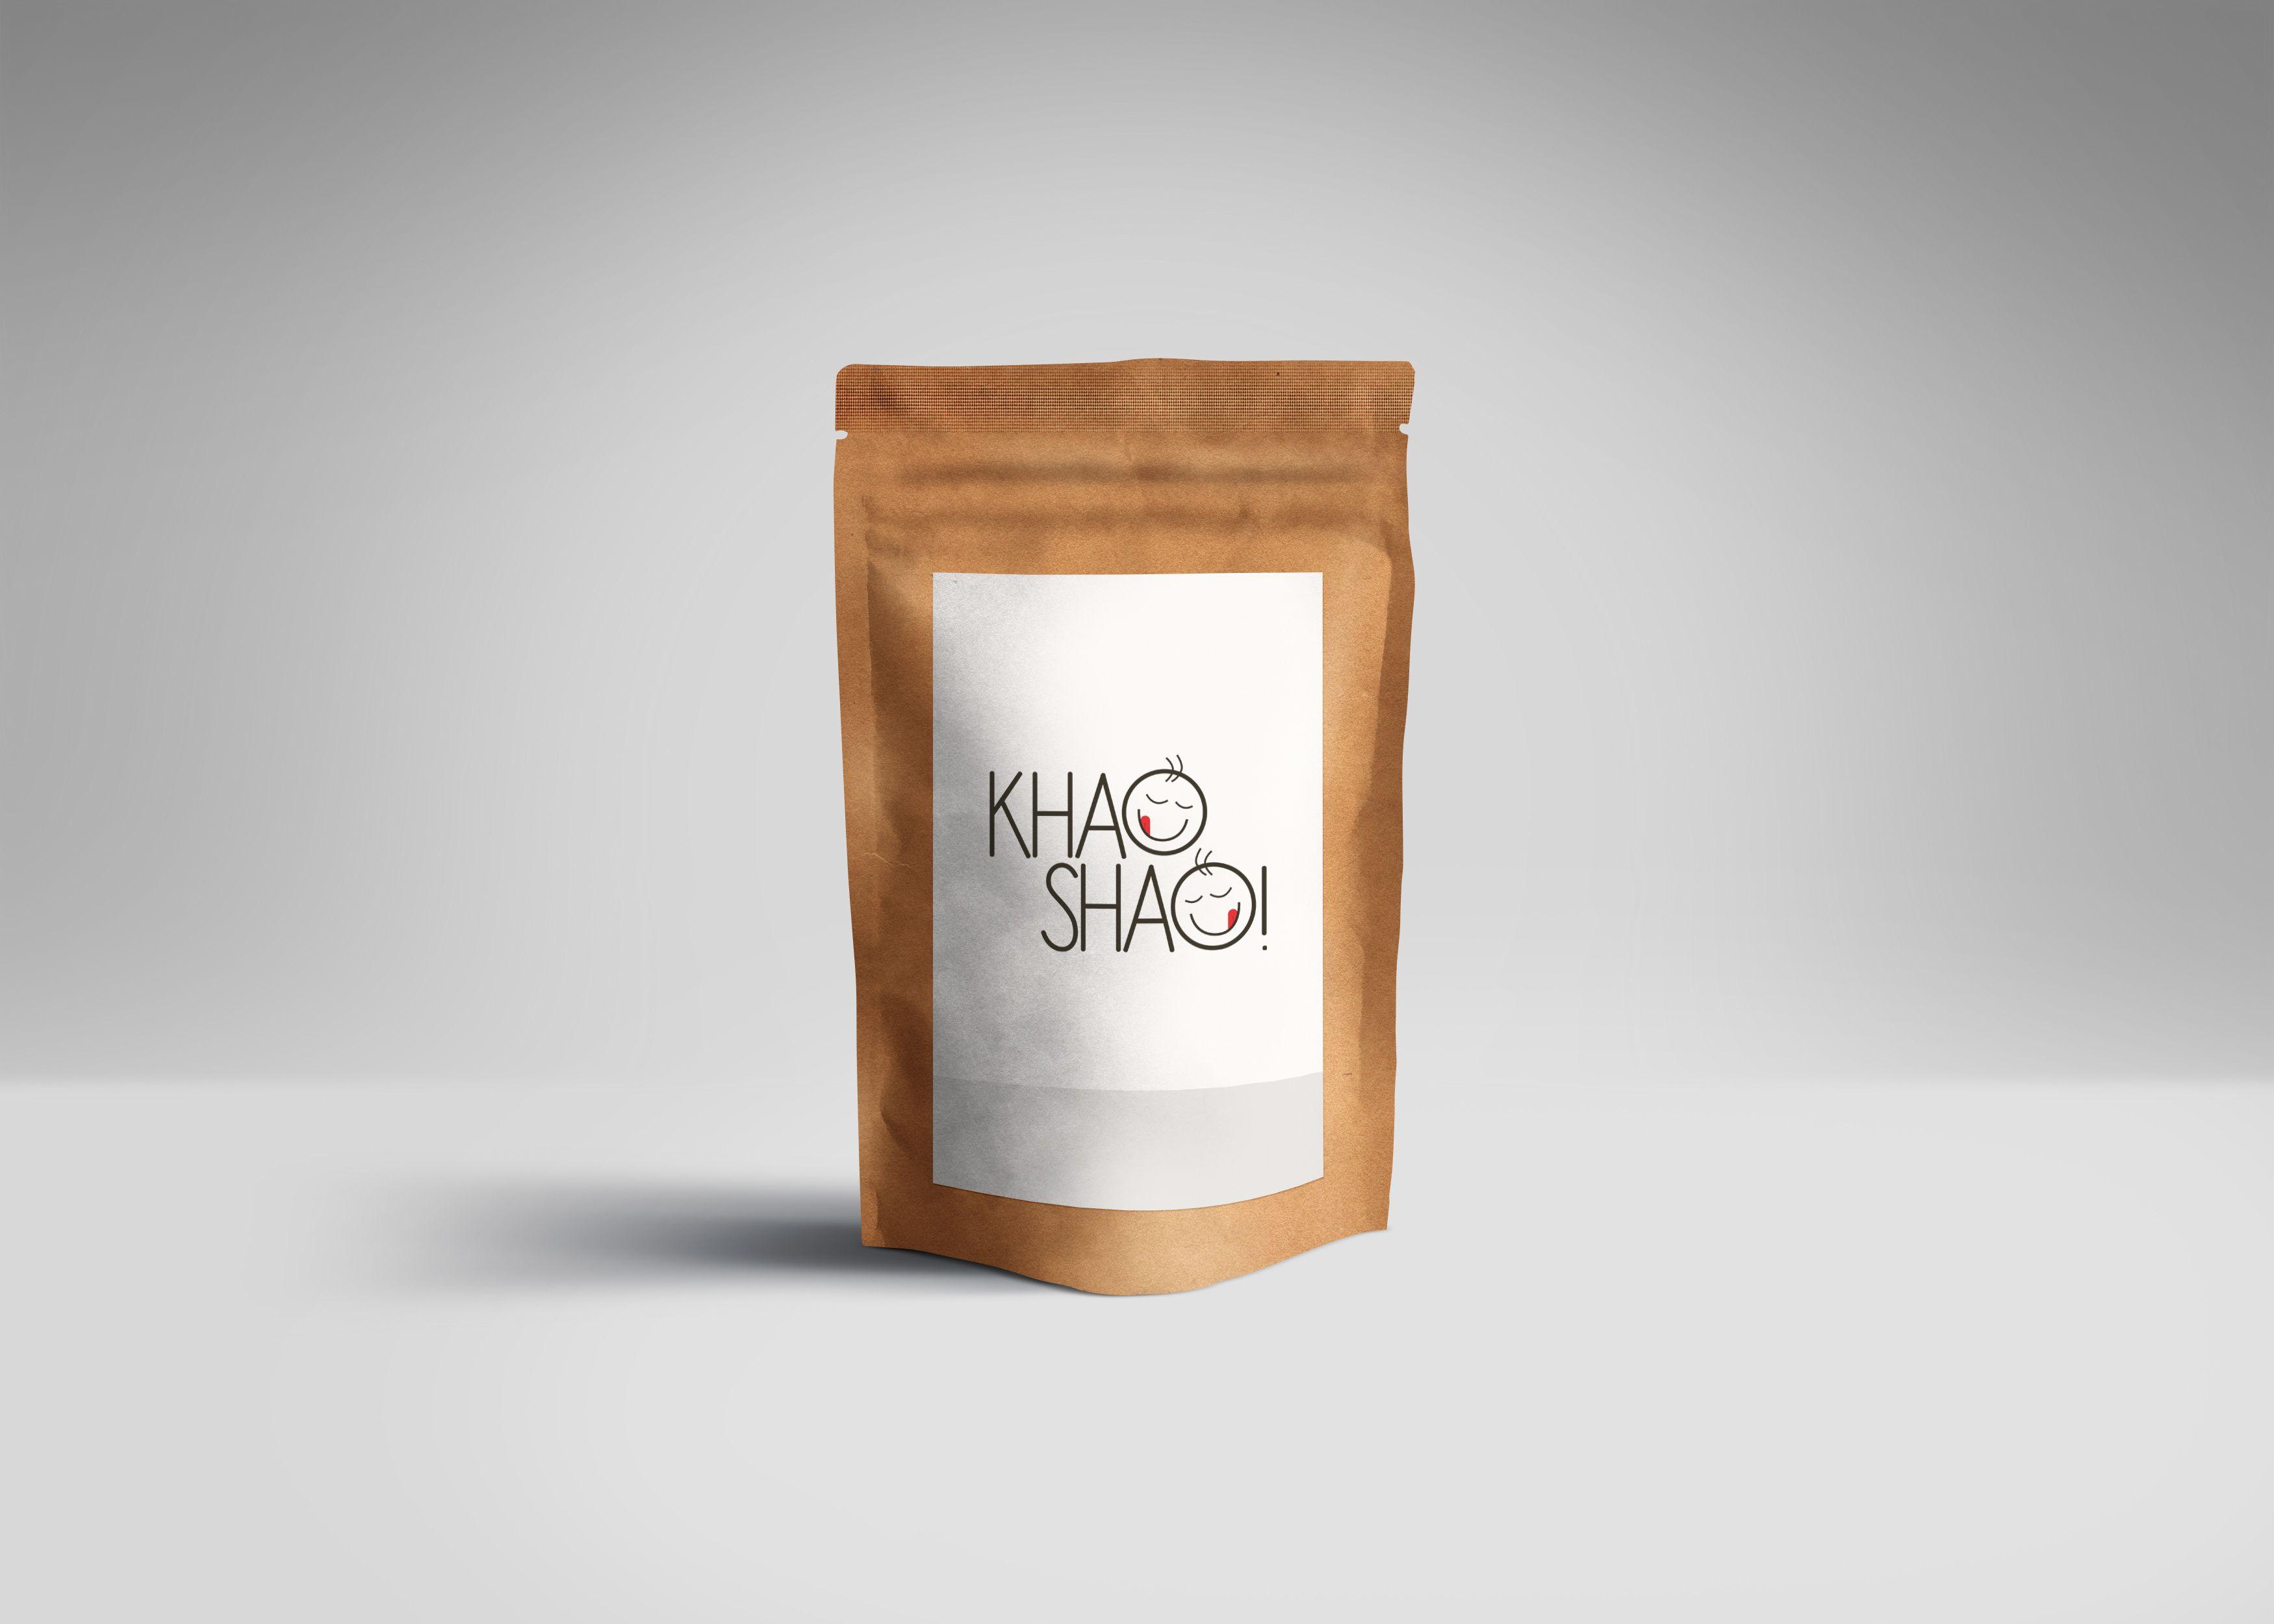 Shao Logo - Check out my @Behance project: 